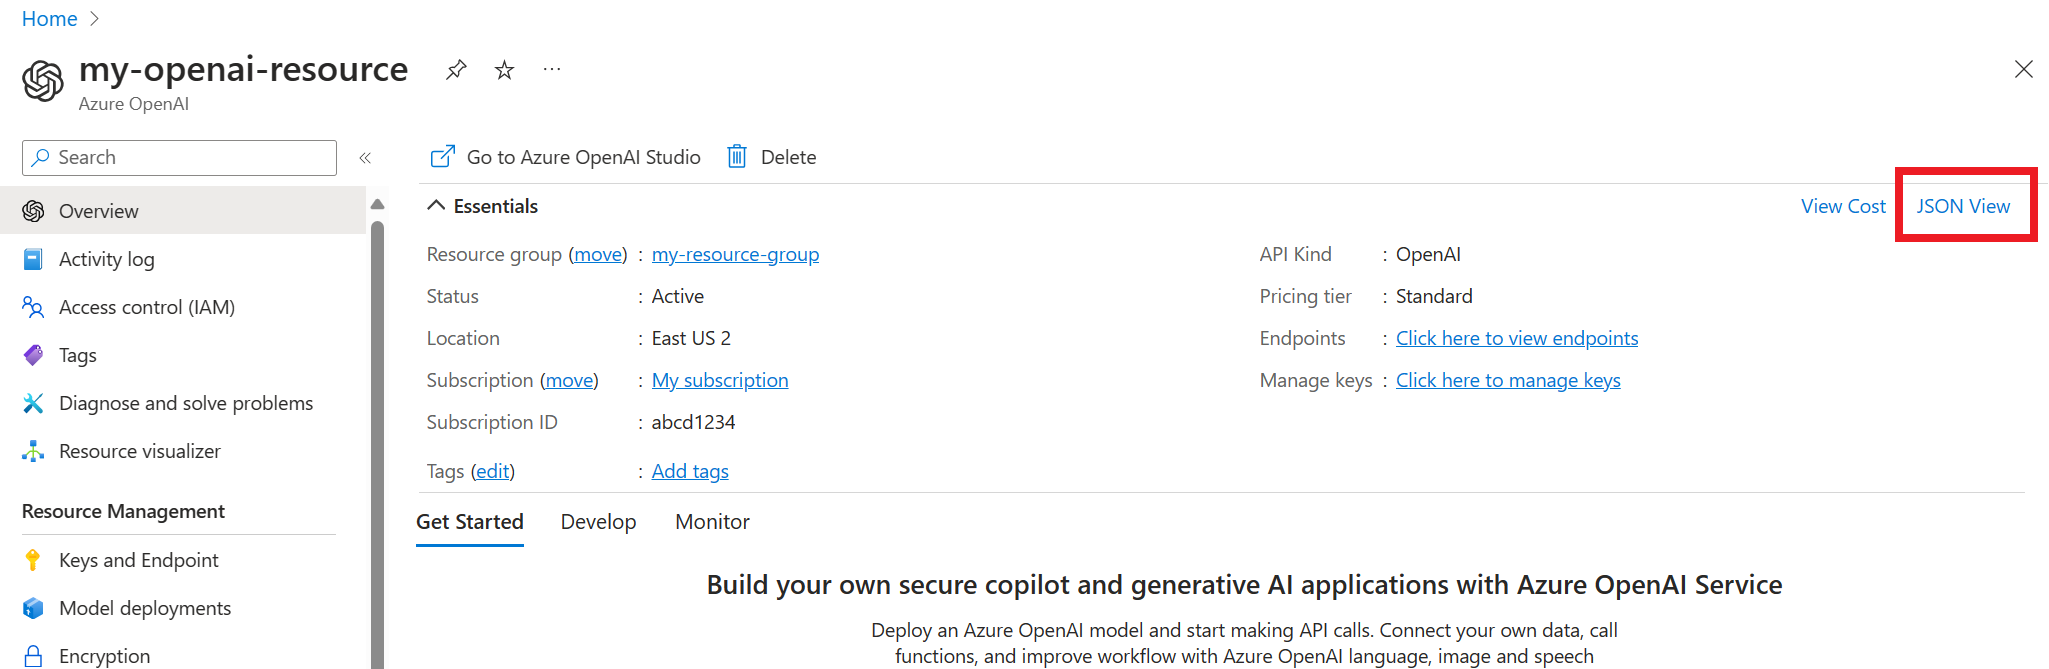 A screenshot showing the JSON view option for resources in the Azure portal.